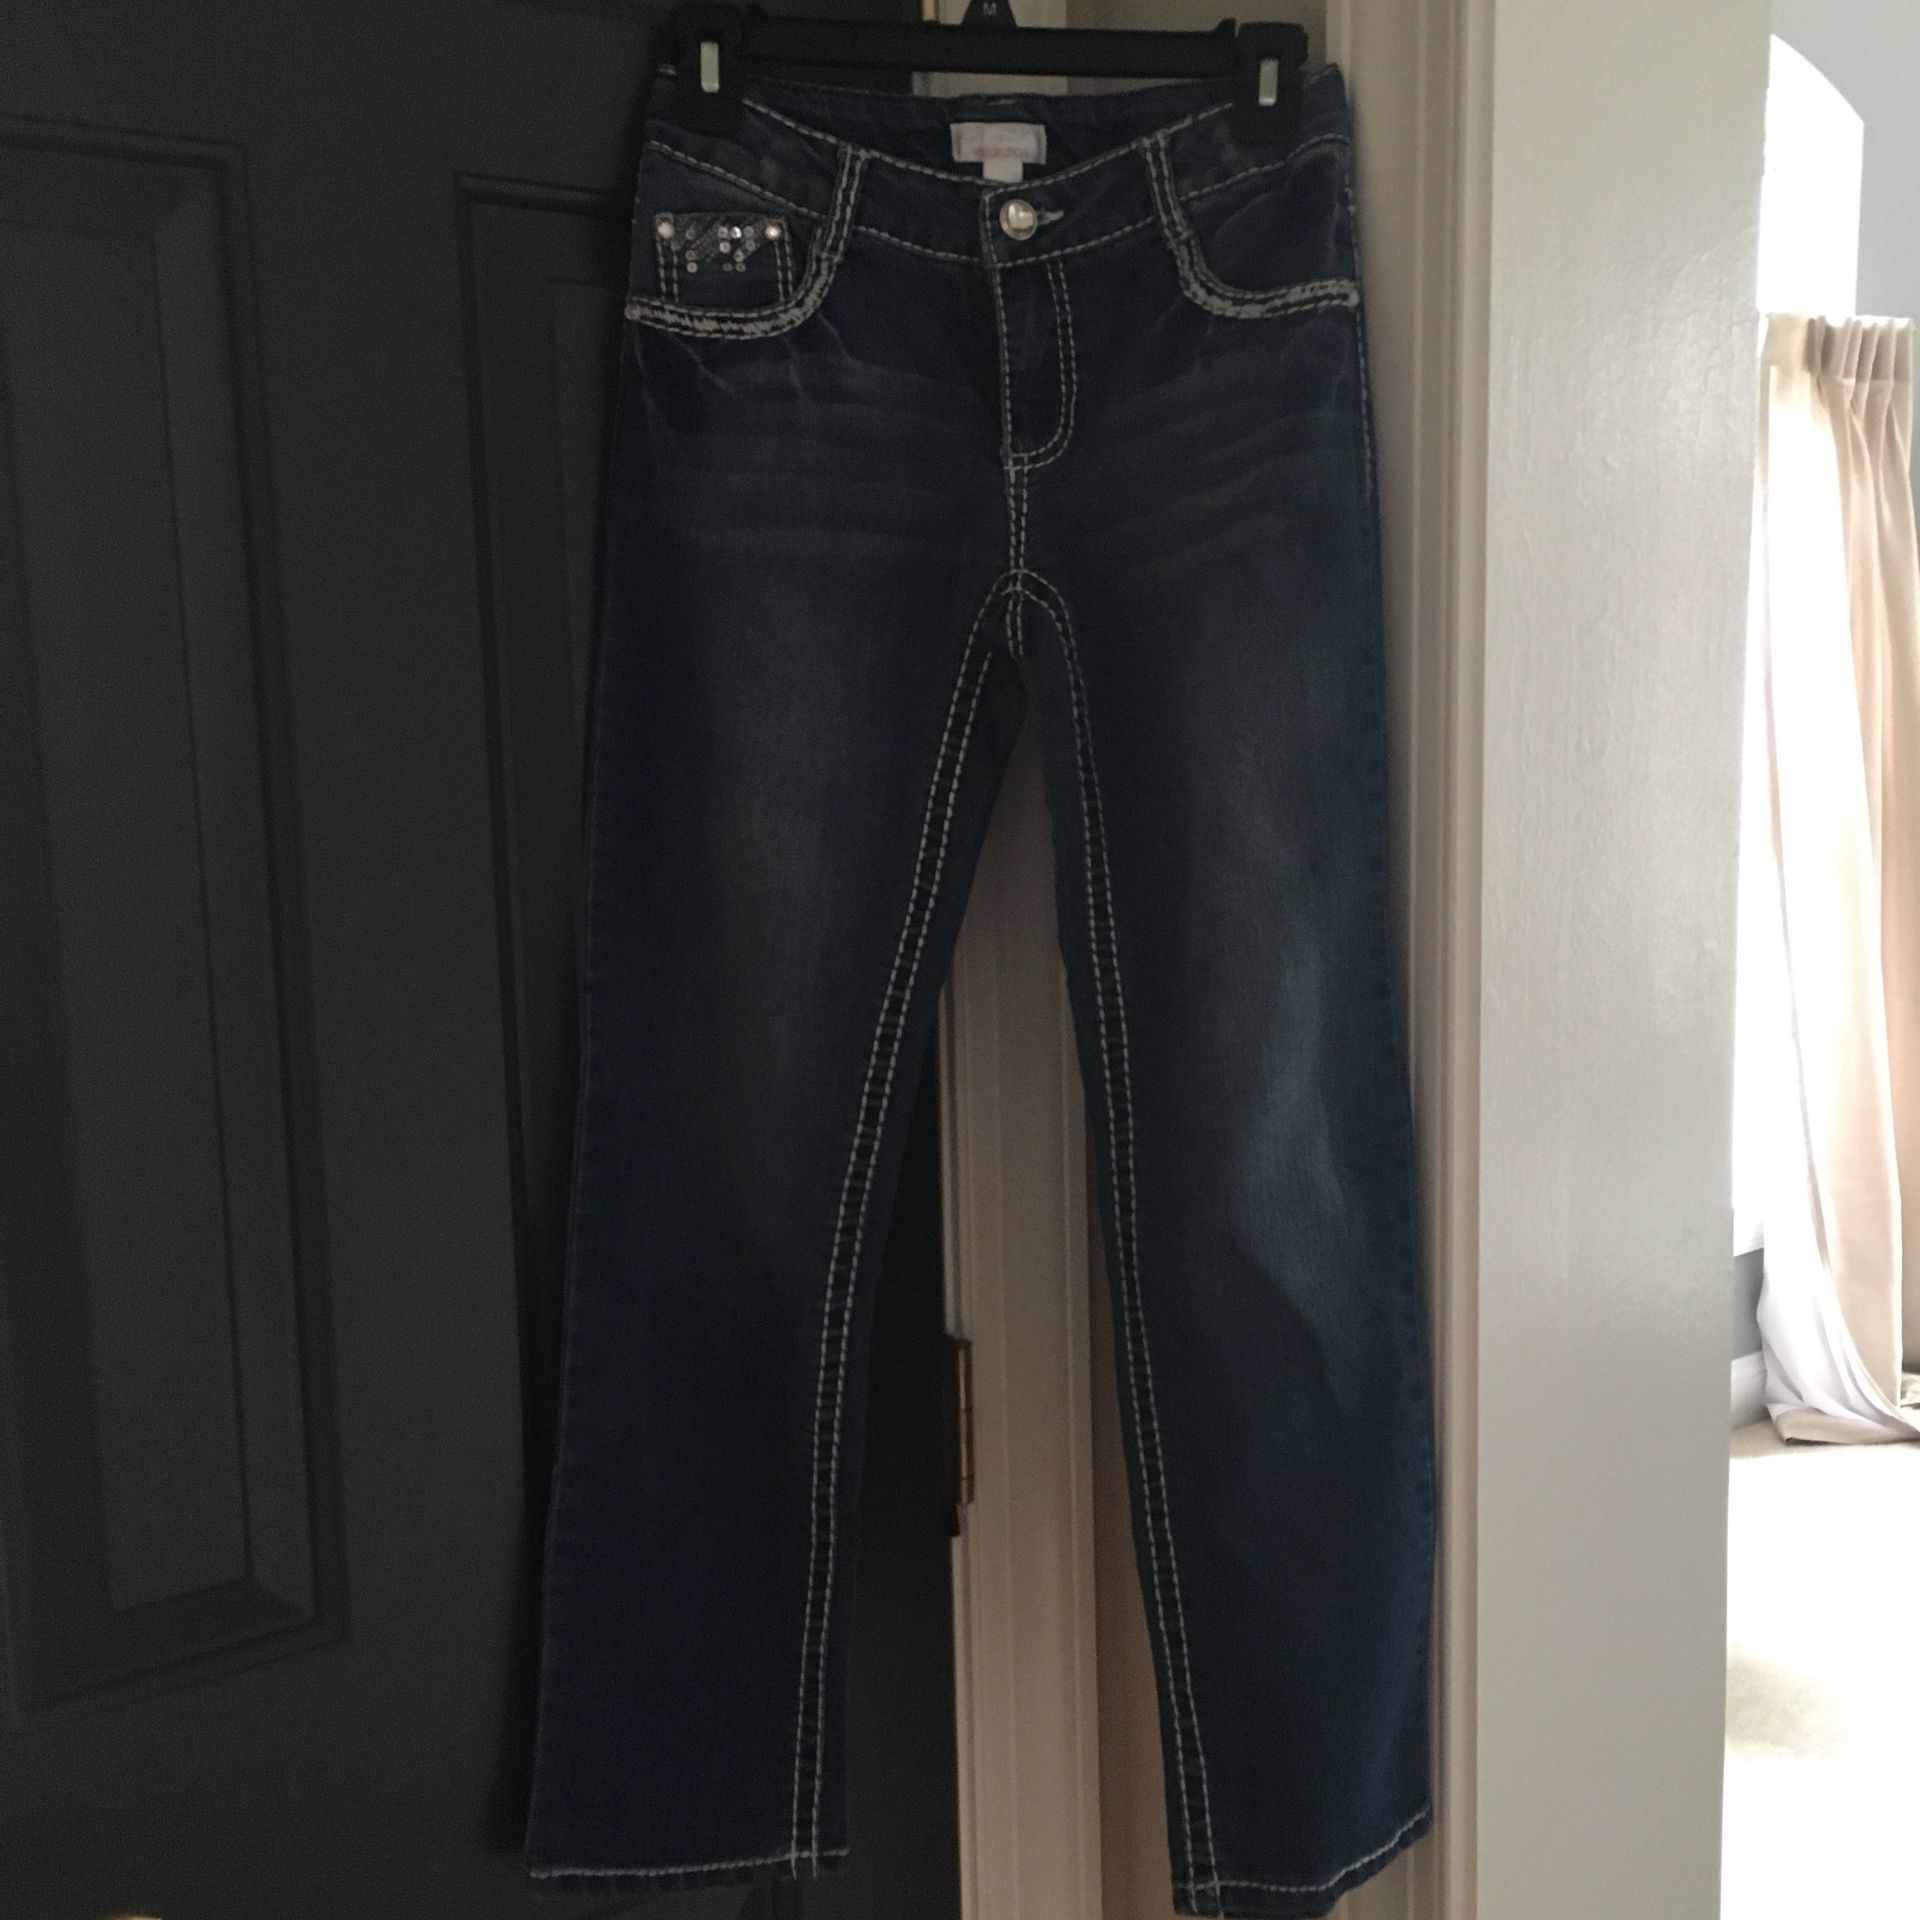 Girls size 12 jeans